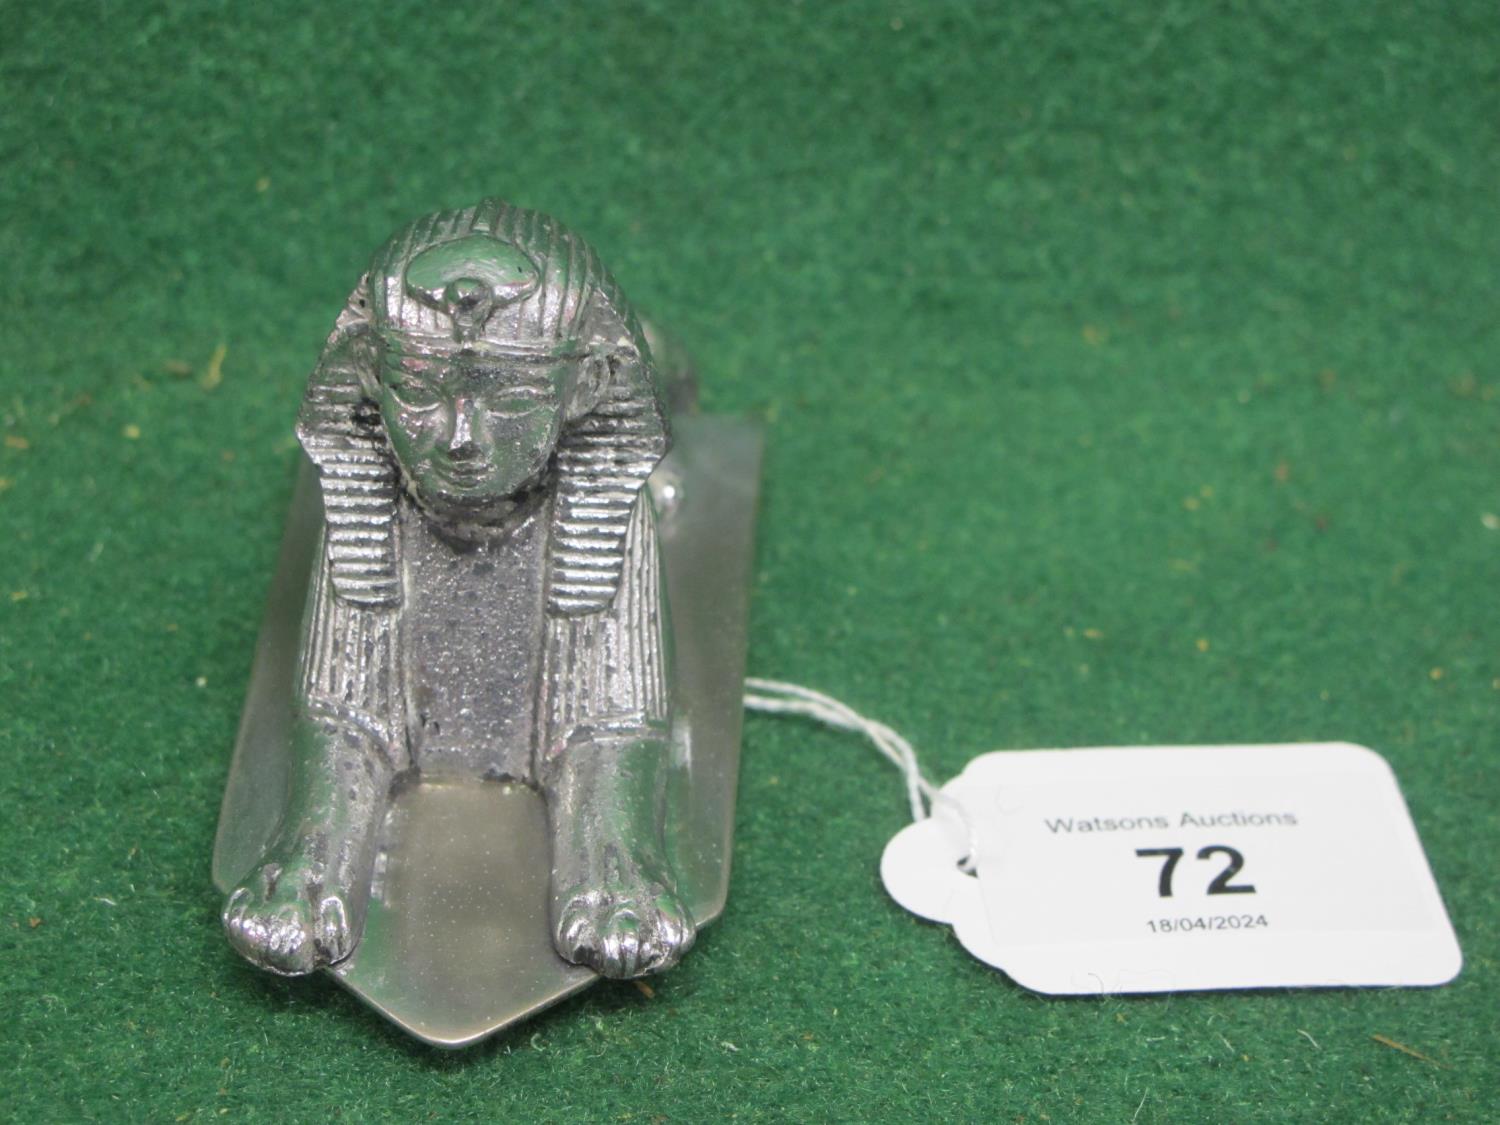 Chromed Sphinx bonnet mascot from an Armstrong Siddeley - 4" long Please note descriptions are not - Image 2 of 3